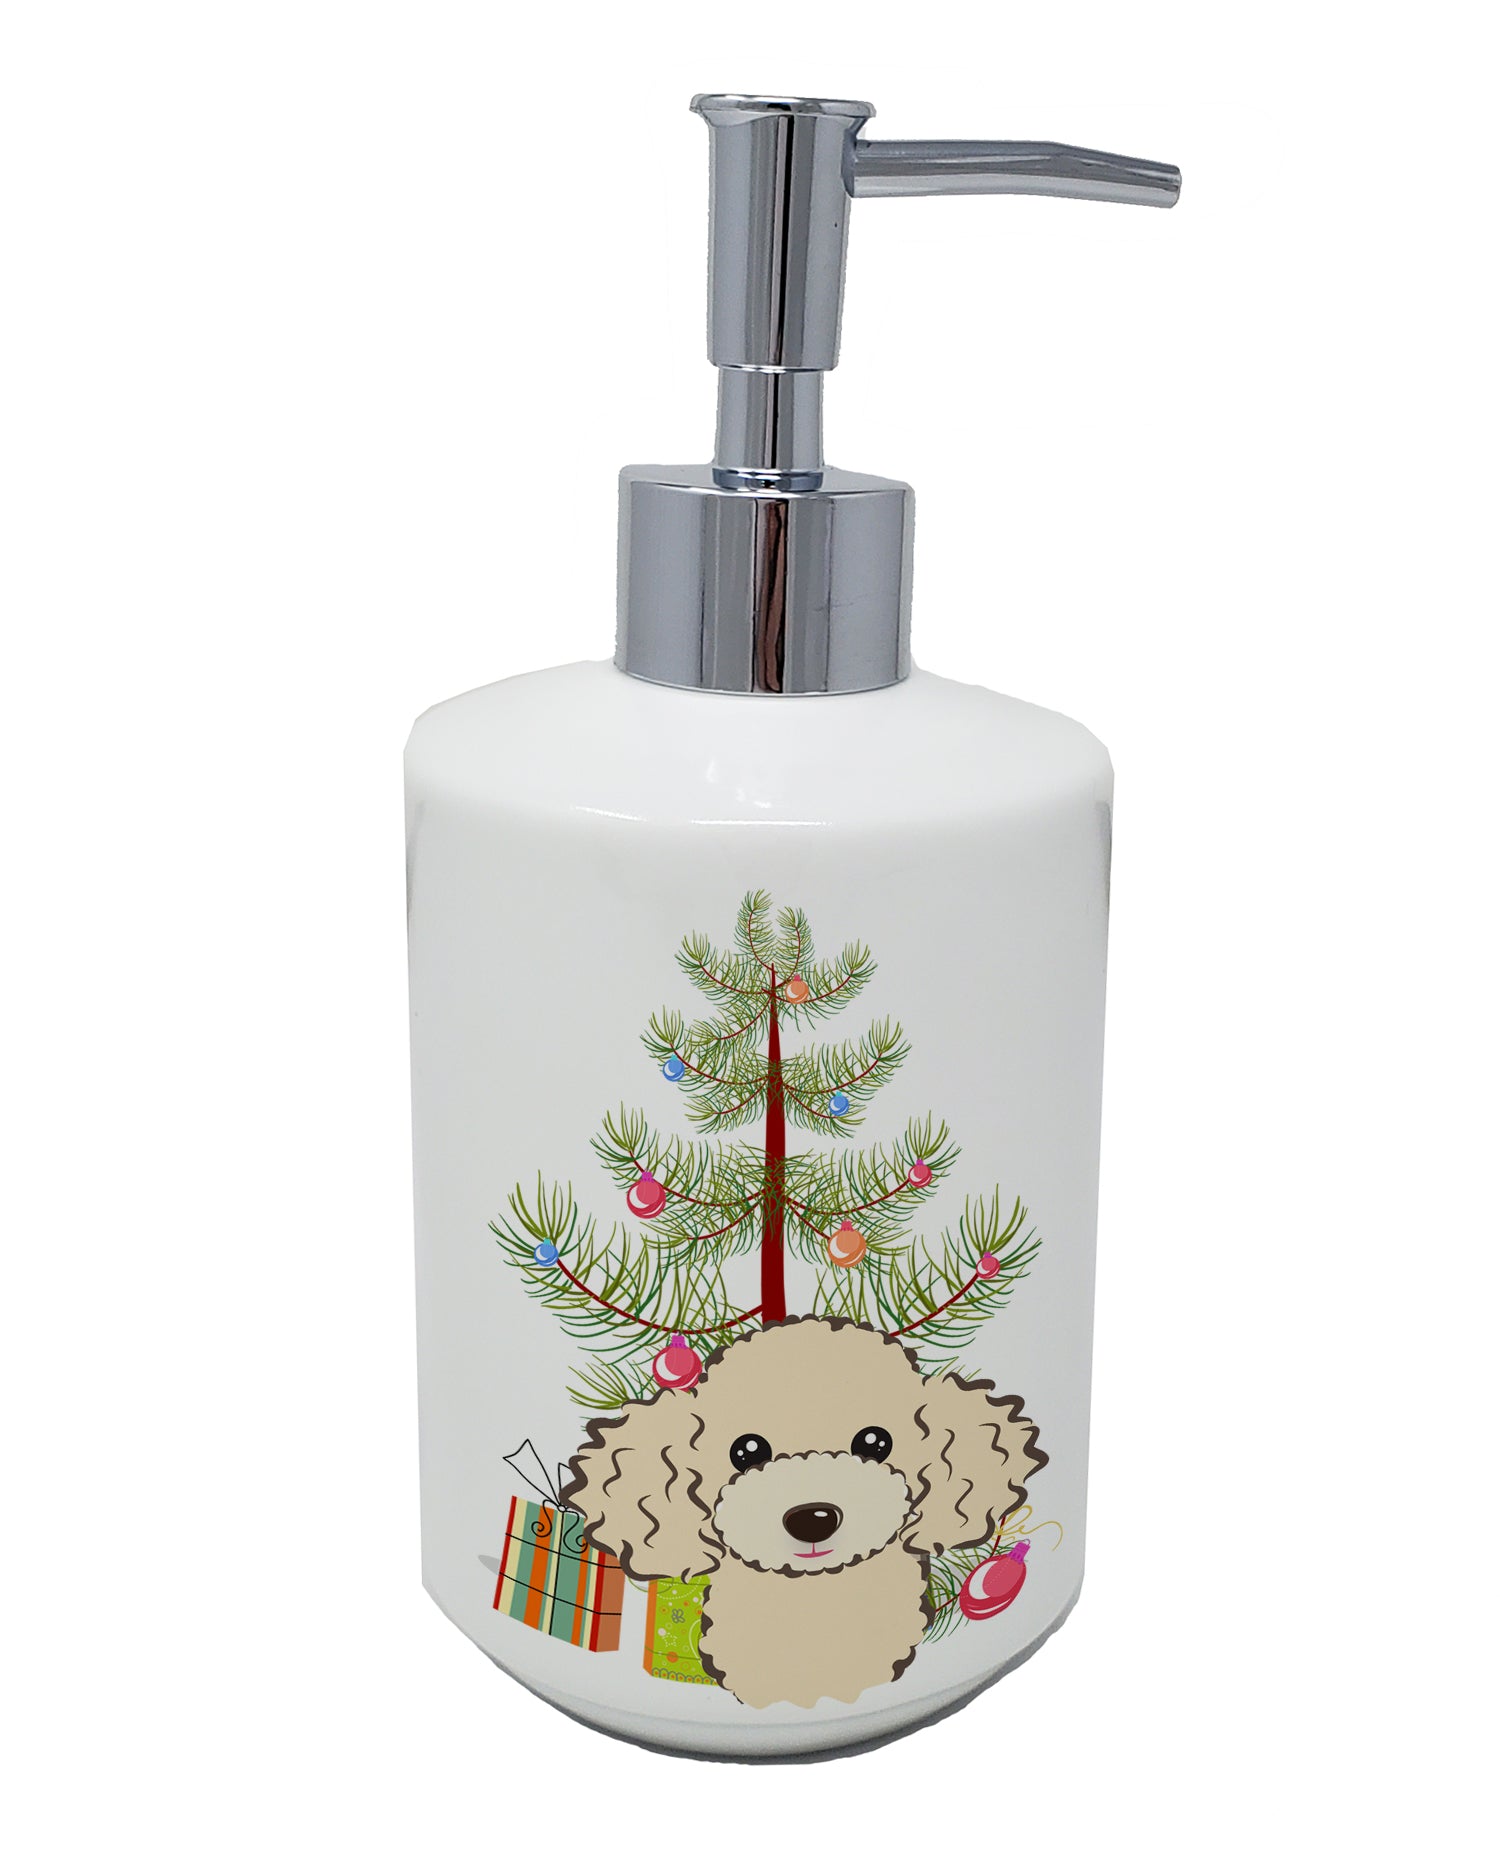 Buy this Christmas Tree and Buff Poodle Ceramic Soap Dispenser